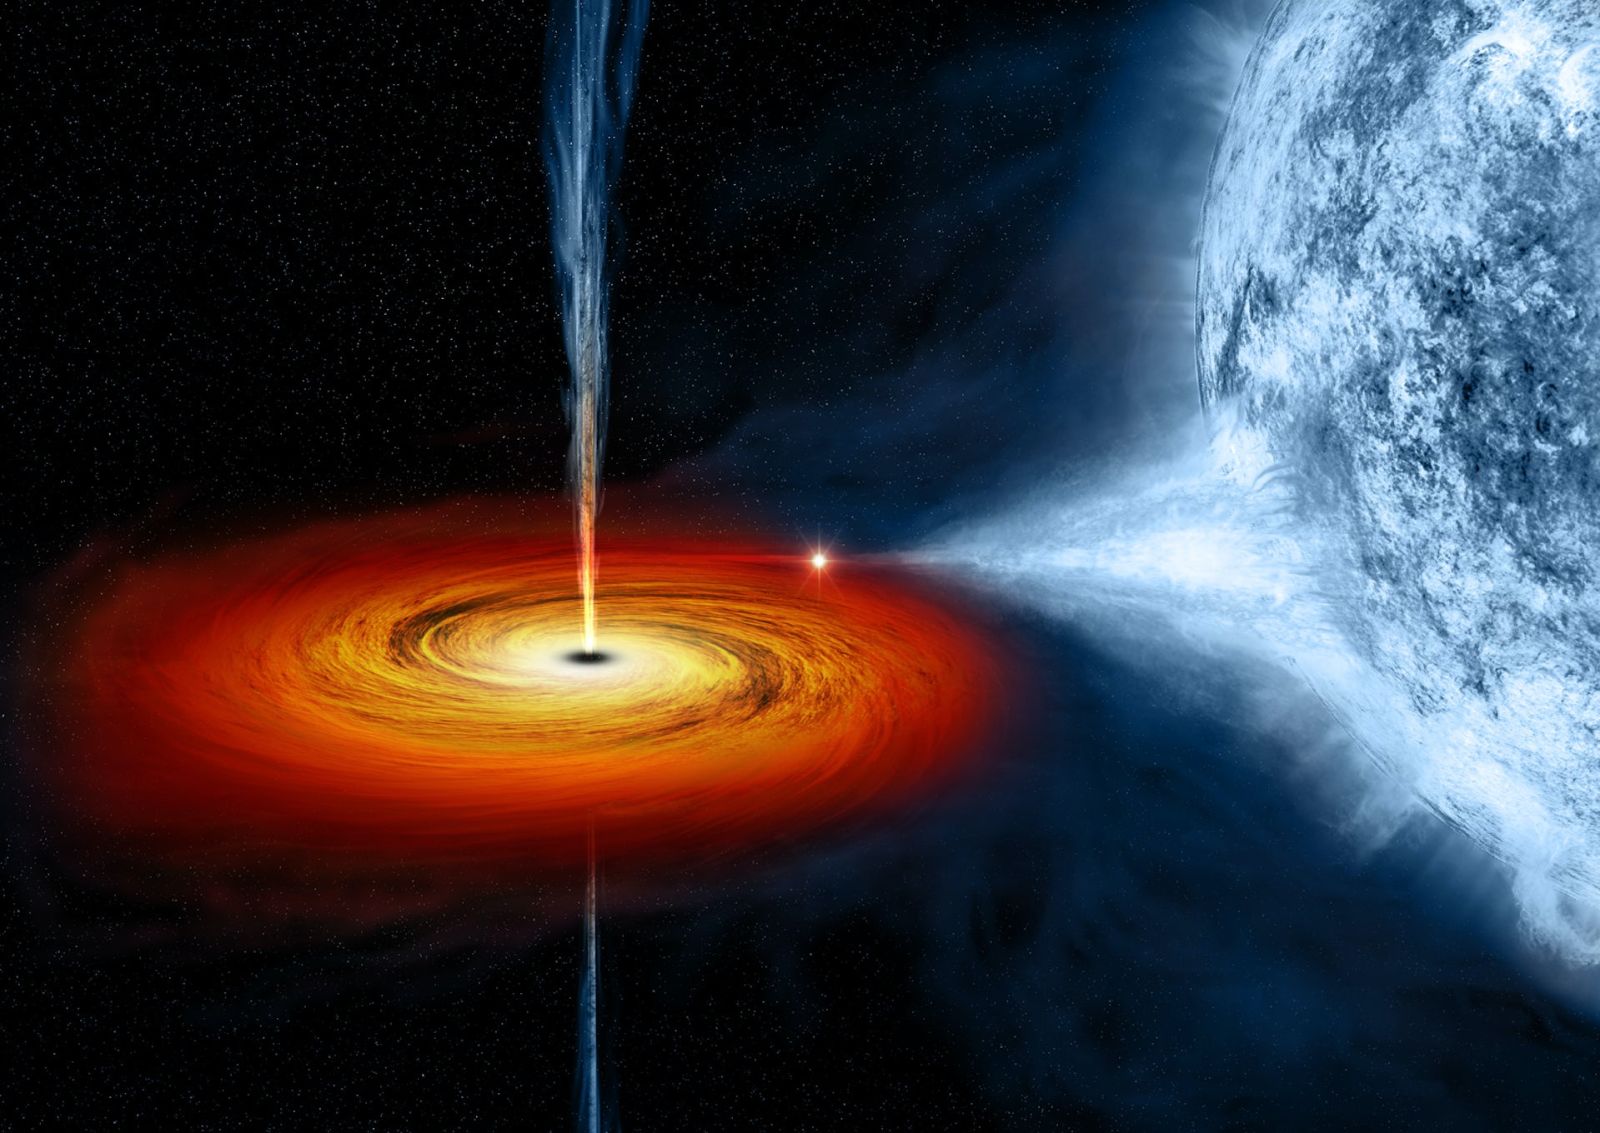 Vampire Black Holes Responsible for These Energetic Bombardments ...